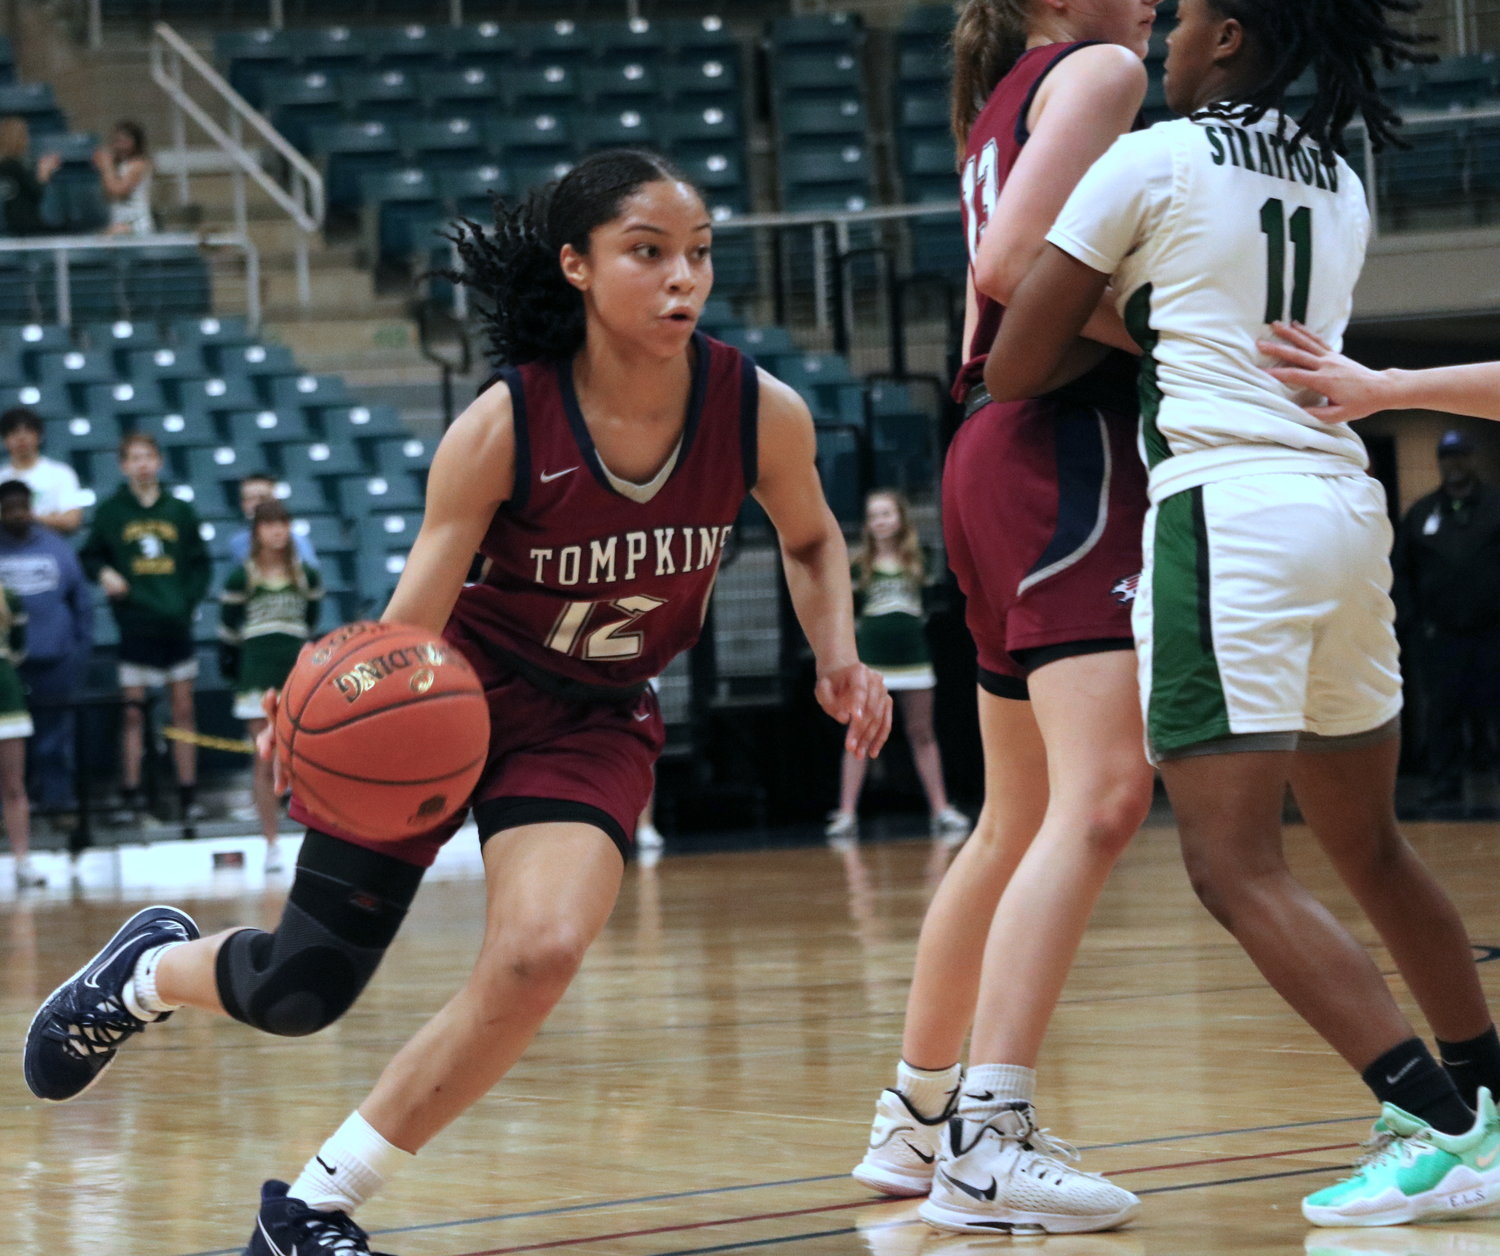 Brooklynn Nash dribbles past a defender during Friday’s game between Tompkins and Stratford at the Merrell Center.